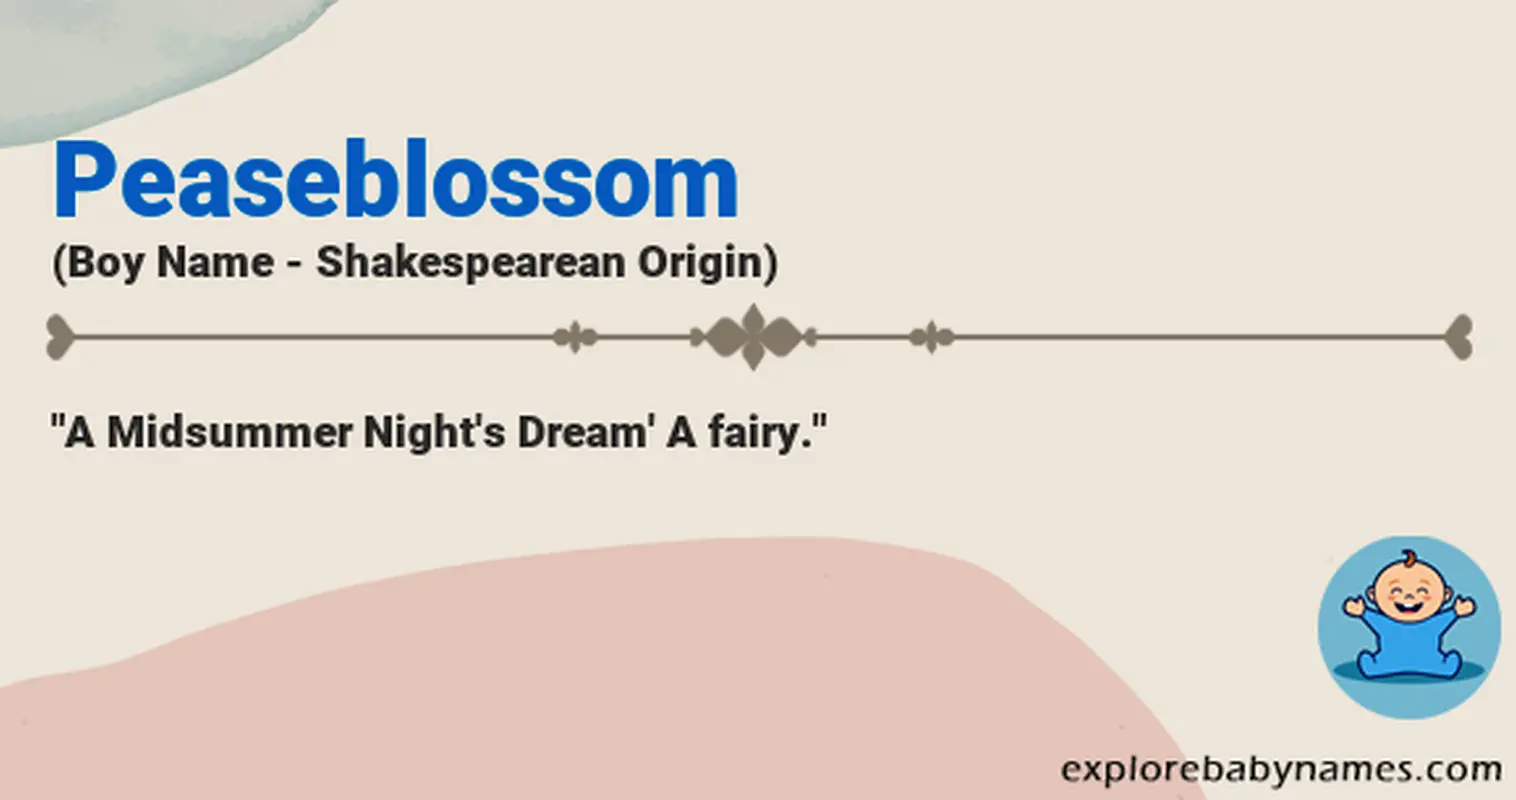 Meaning of Peaseblossom